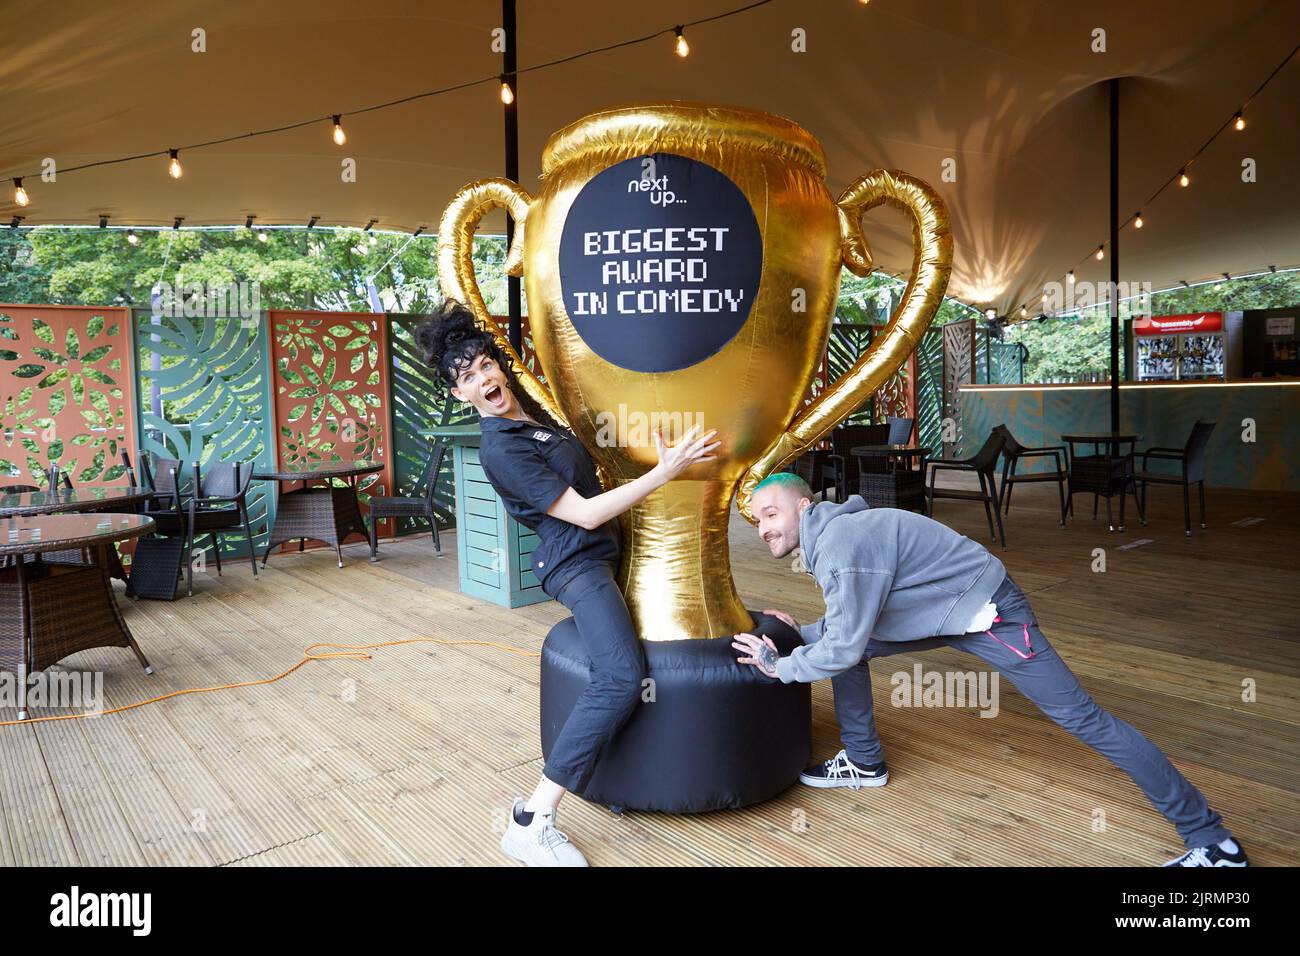 Edinburgh, UK. 25th Aug, 2022. Jordan Gray (L) wins NextUp's ‘Biggest Award in Comedy' at the Edinburgh Festival Fringe for her show 'Is it a Bird'. A giant two metre inflateable trophy was Awarded to Jordan by Dan Berg from NextUp. Credit: Brian Wilson/Alamy Live News Stock Photo